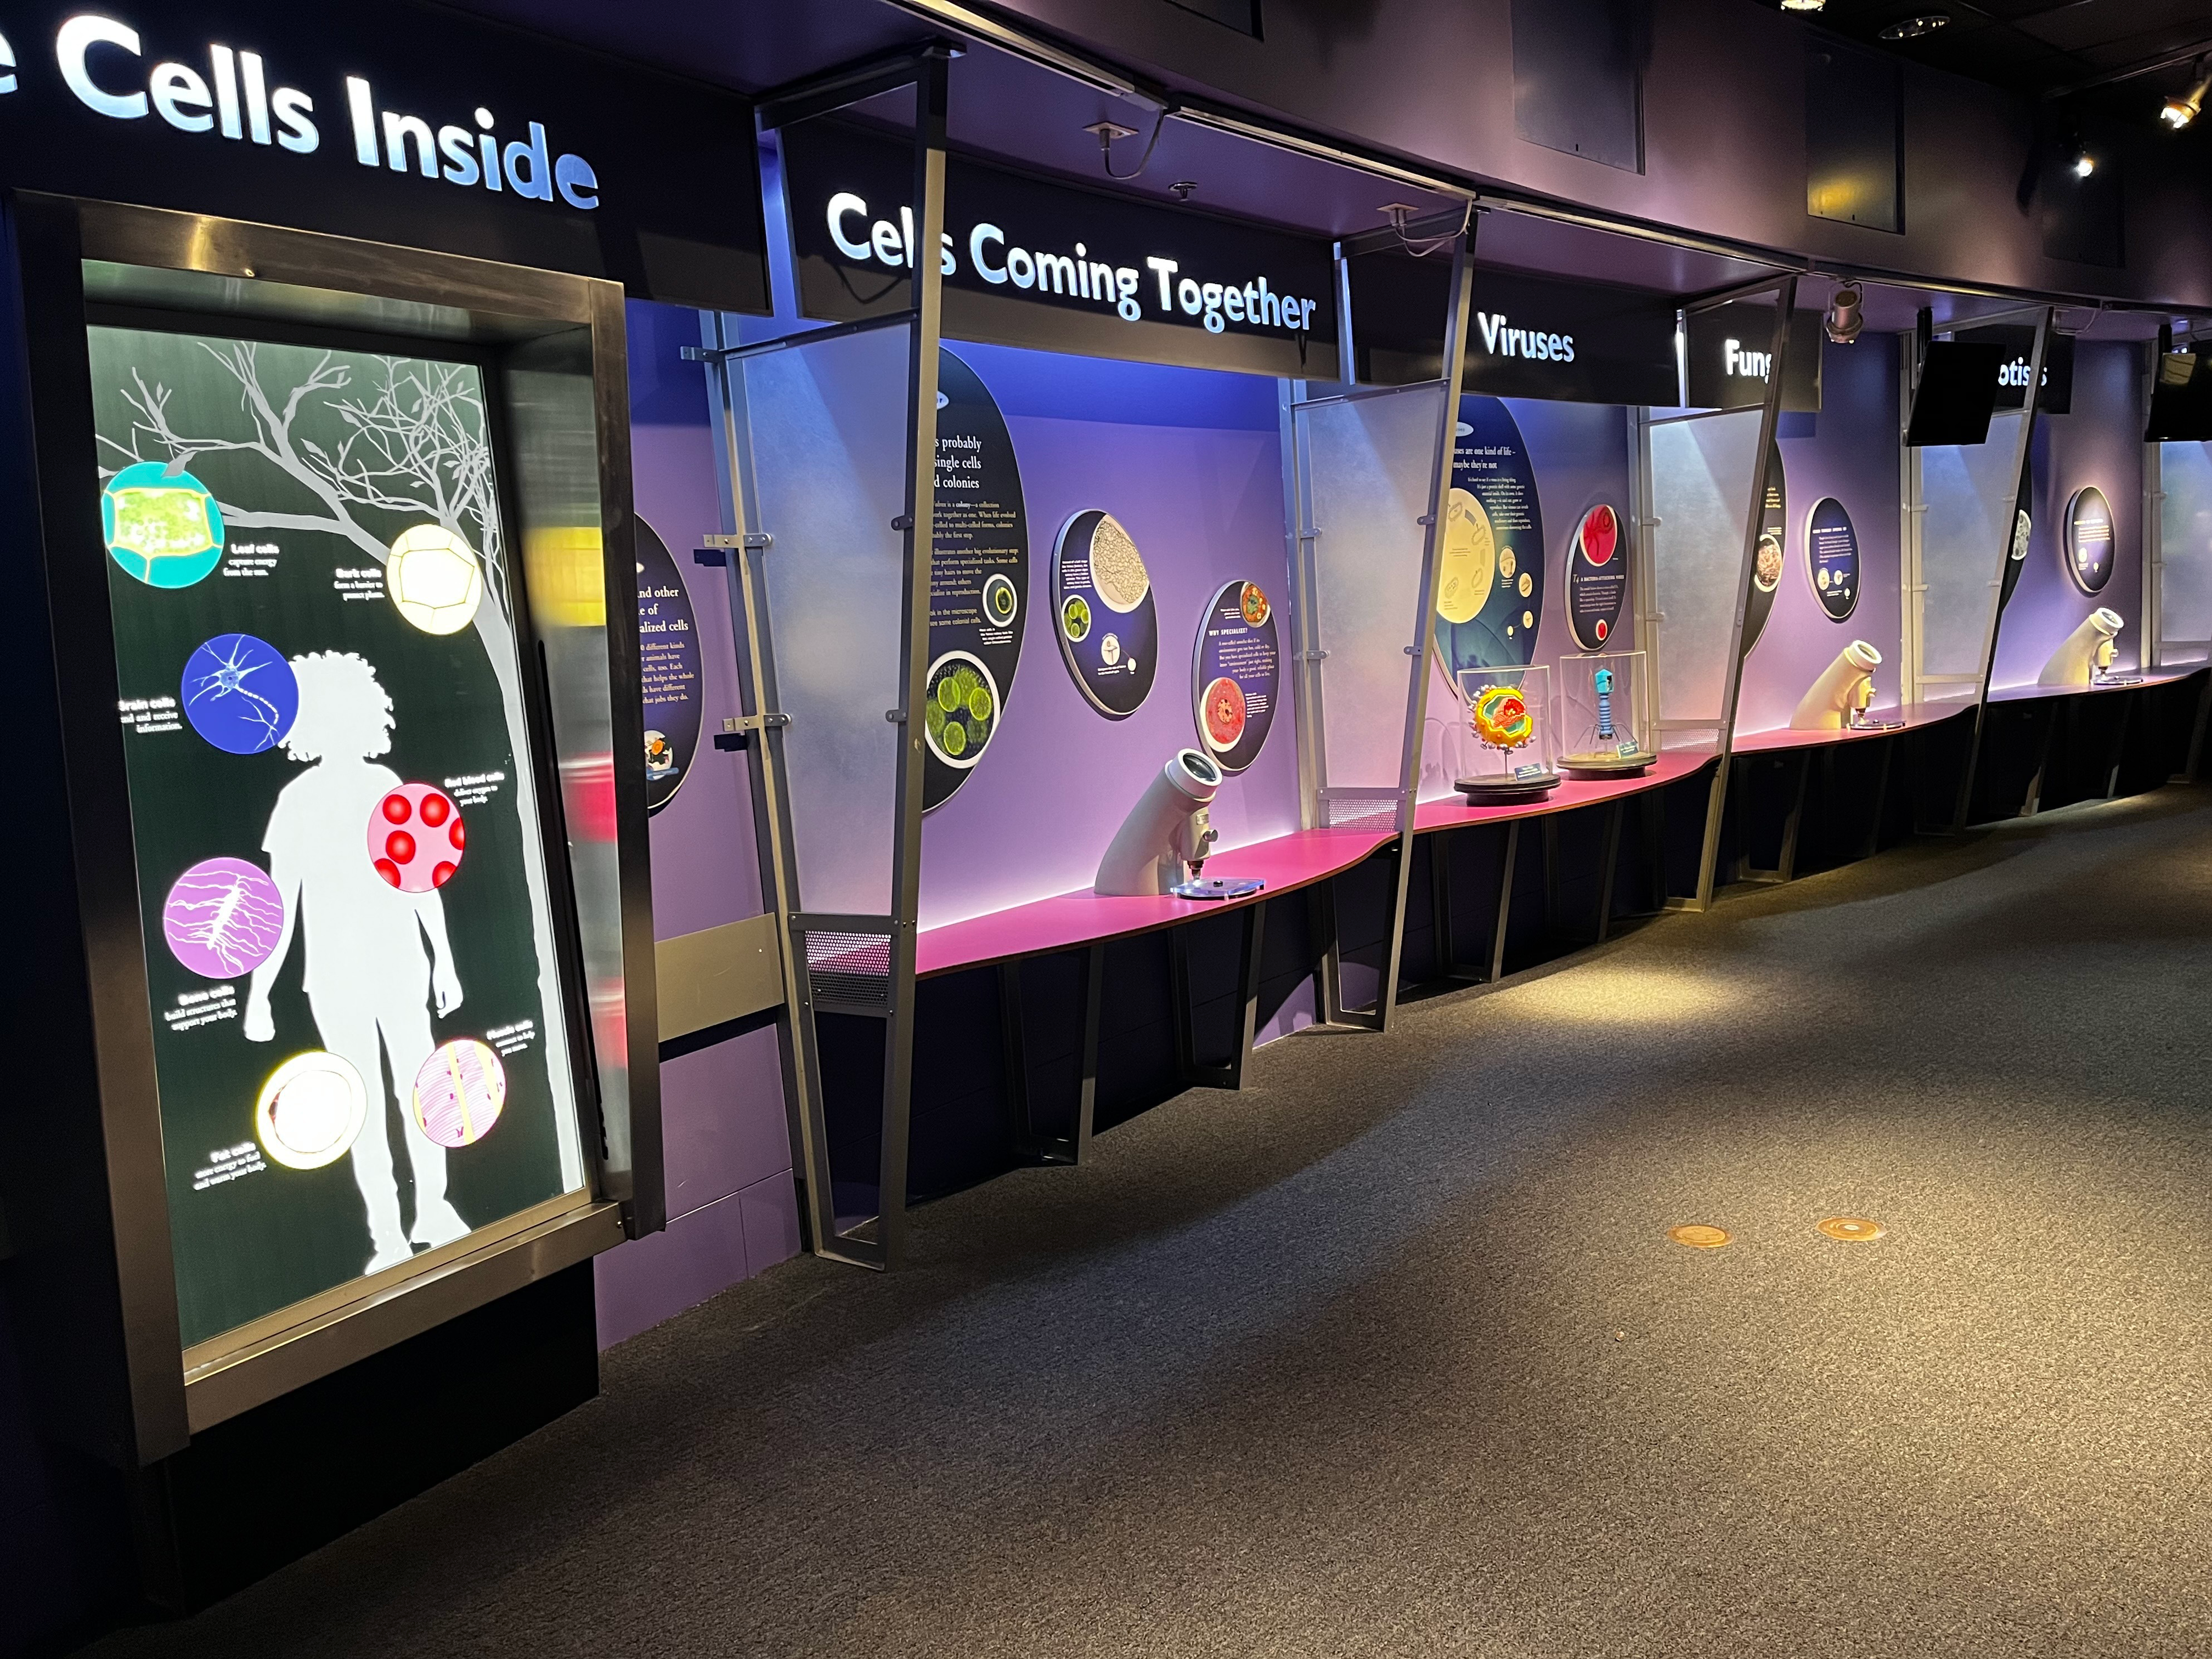 Photograph of Cell Lab exhibit